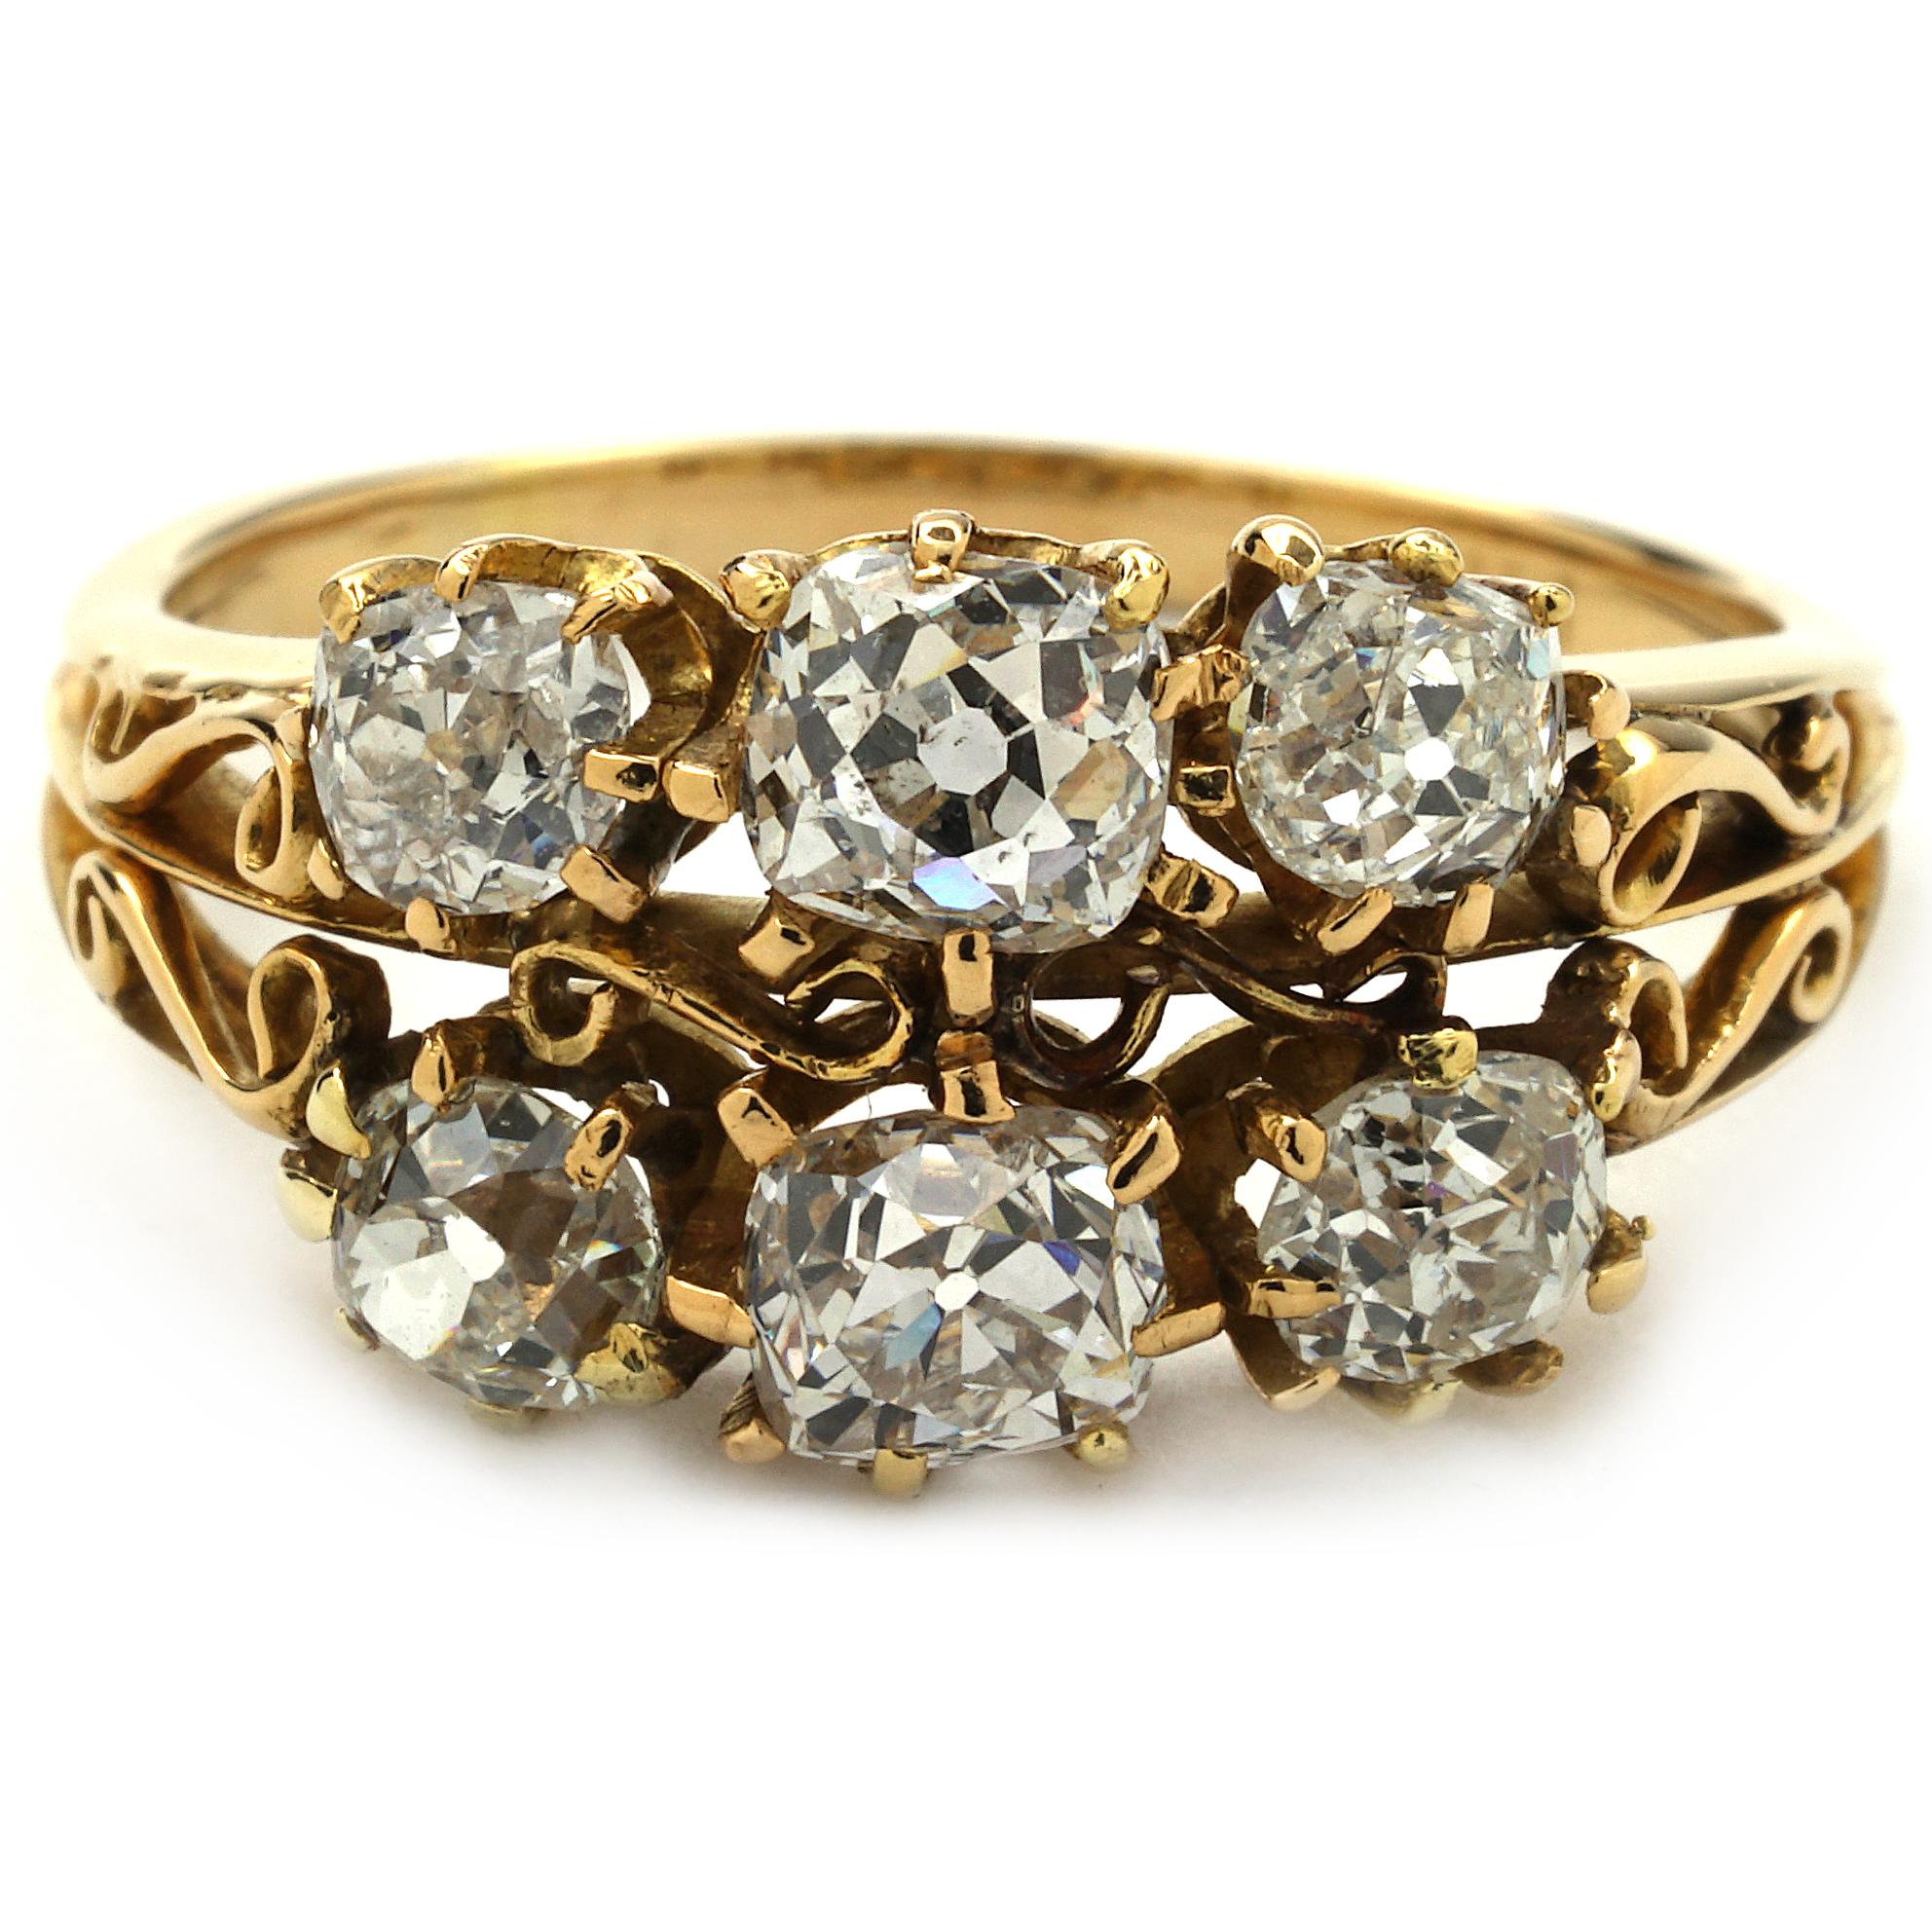 This antique ring is made of 14K yellow gold. It contains 6 old mine cut diamonds weighing 2.09 CTTW. The Color ranges G-I and Clarity is SI